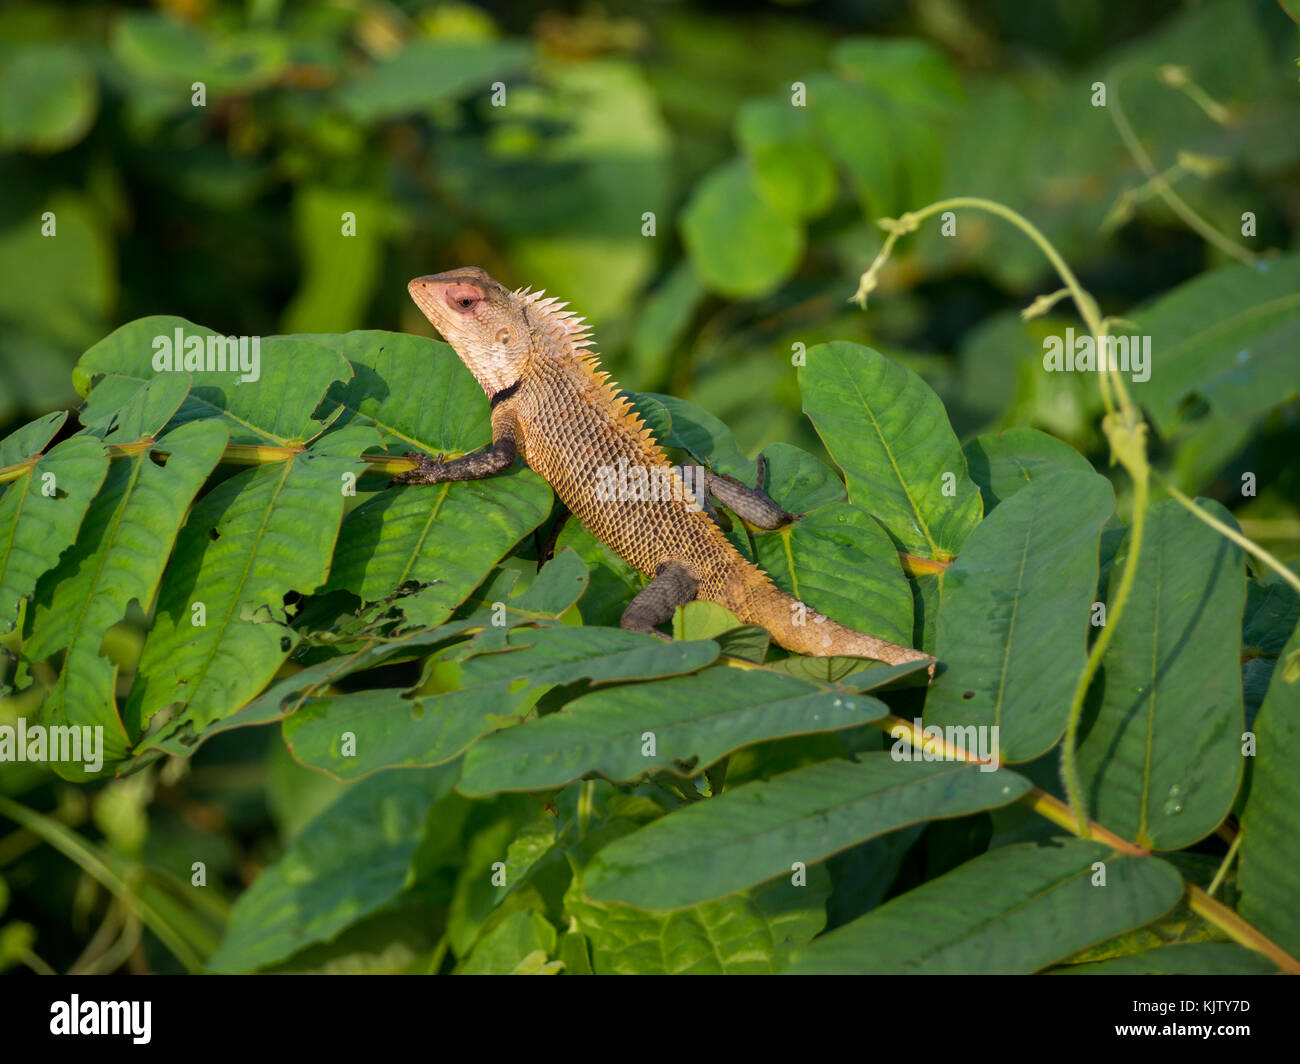 Brown lizard in green plant leafs Stock Photo